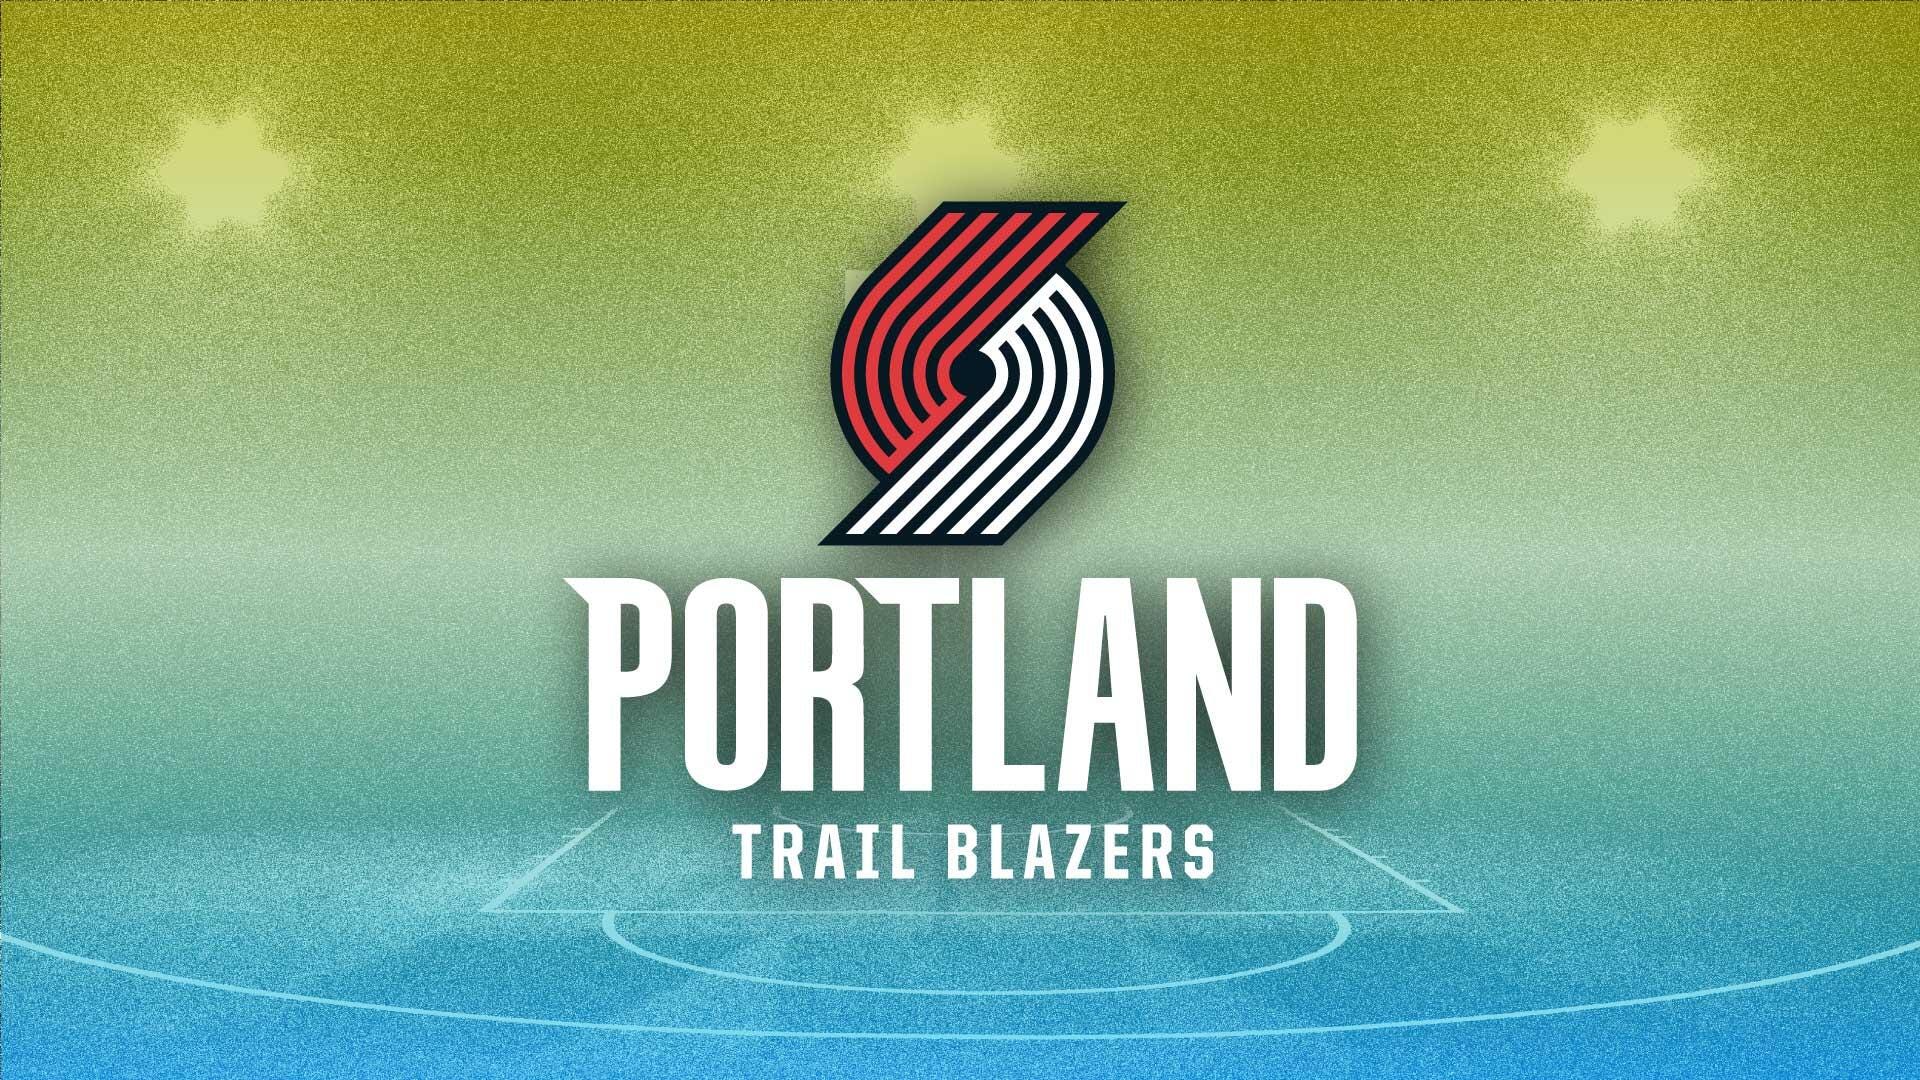 How To Watch The Trail Blazers